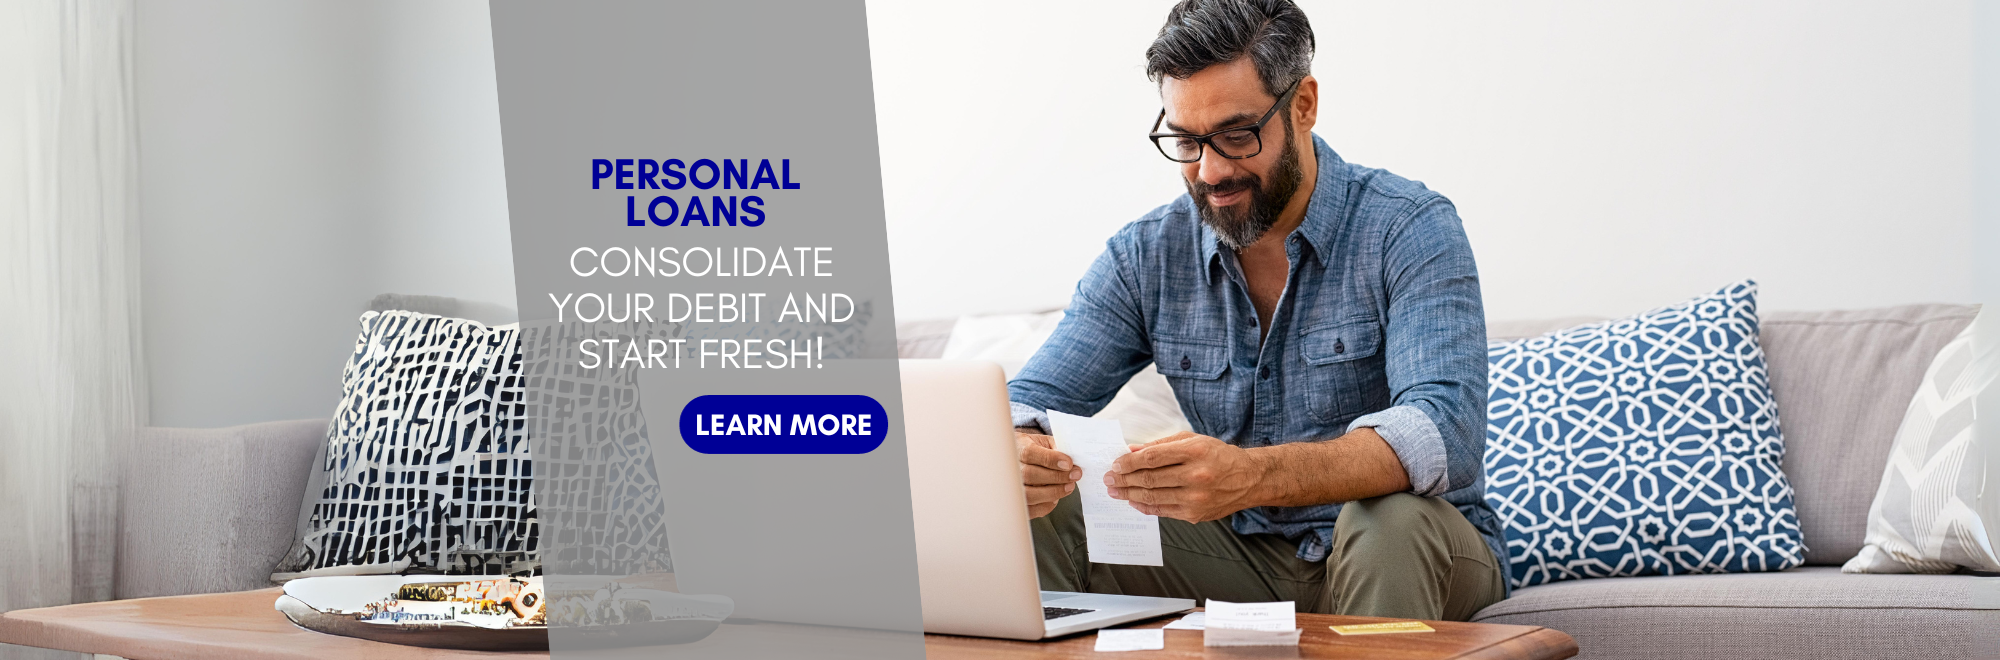 Personal Loans Consolidate your debt and start fresh! click to learn more